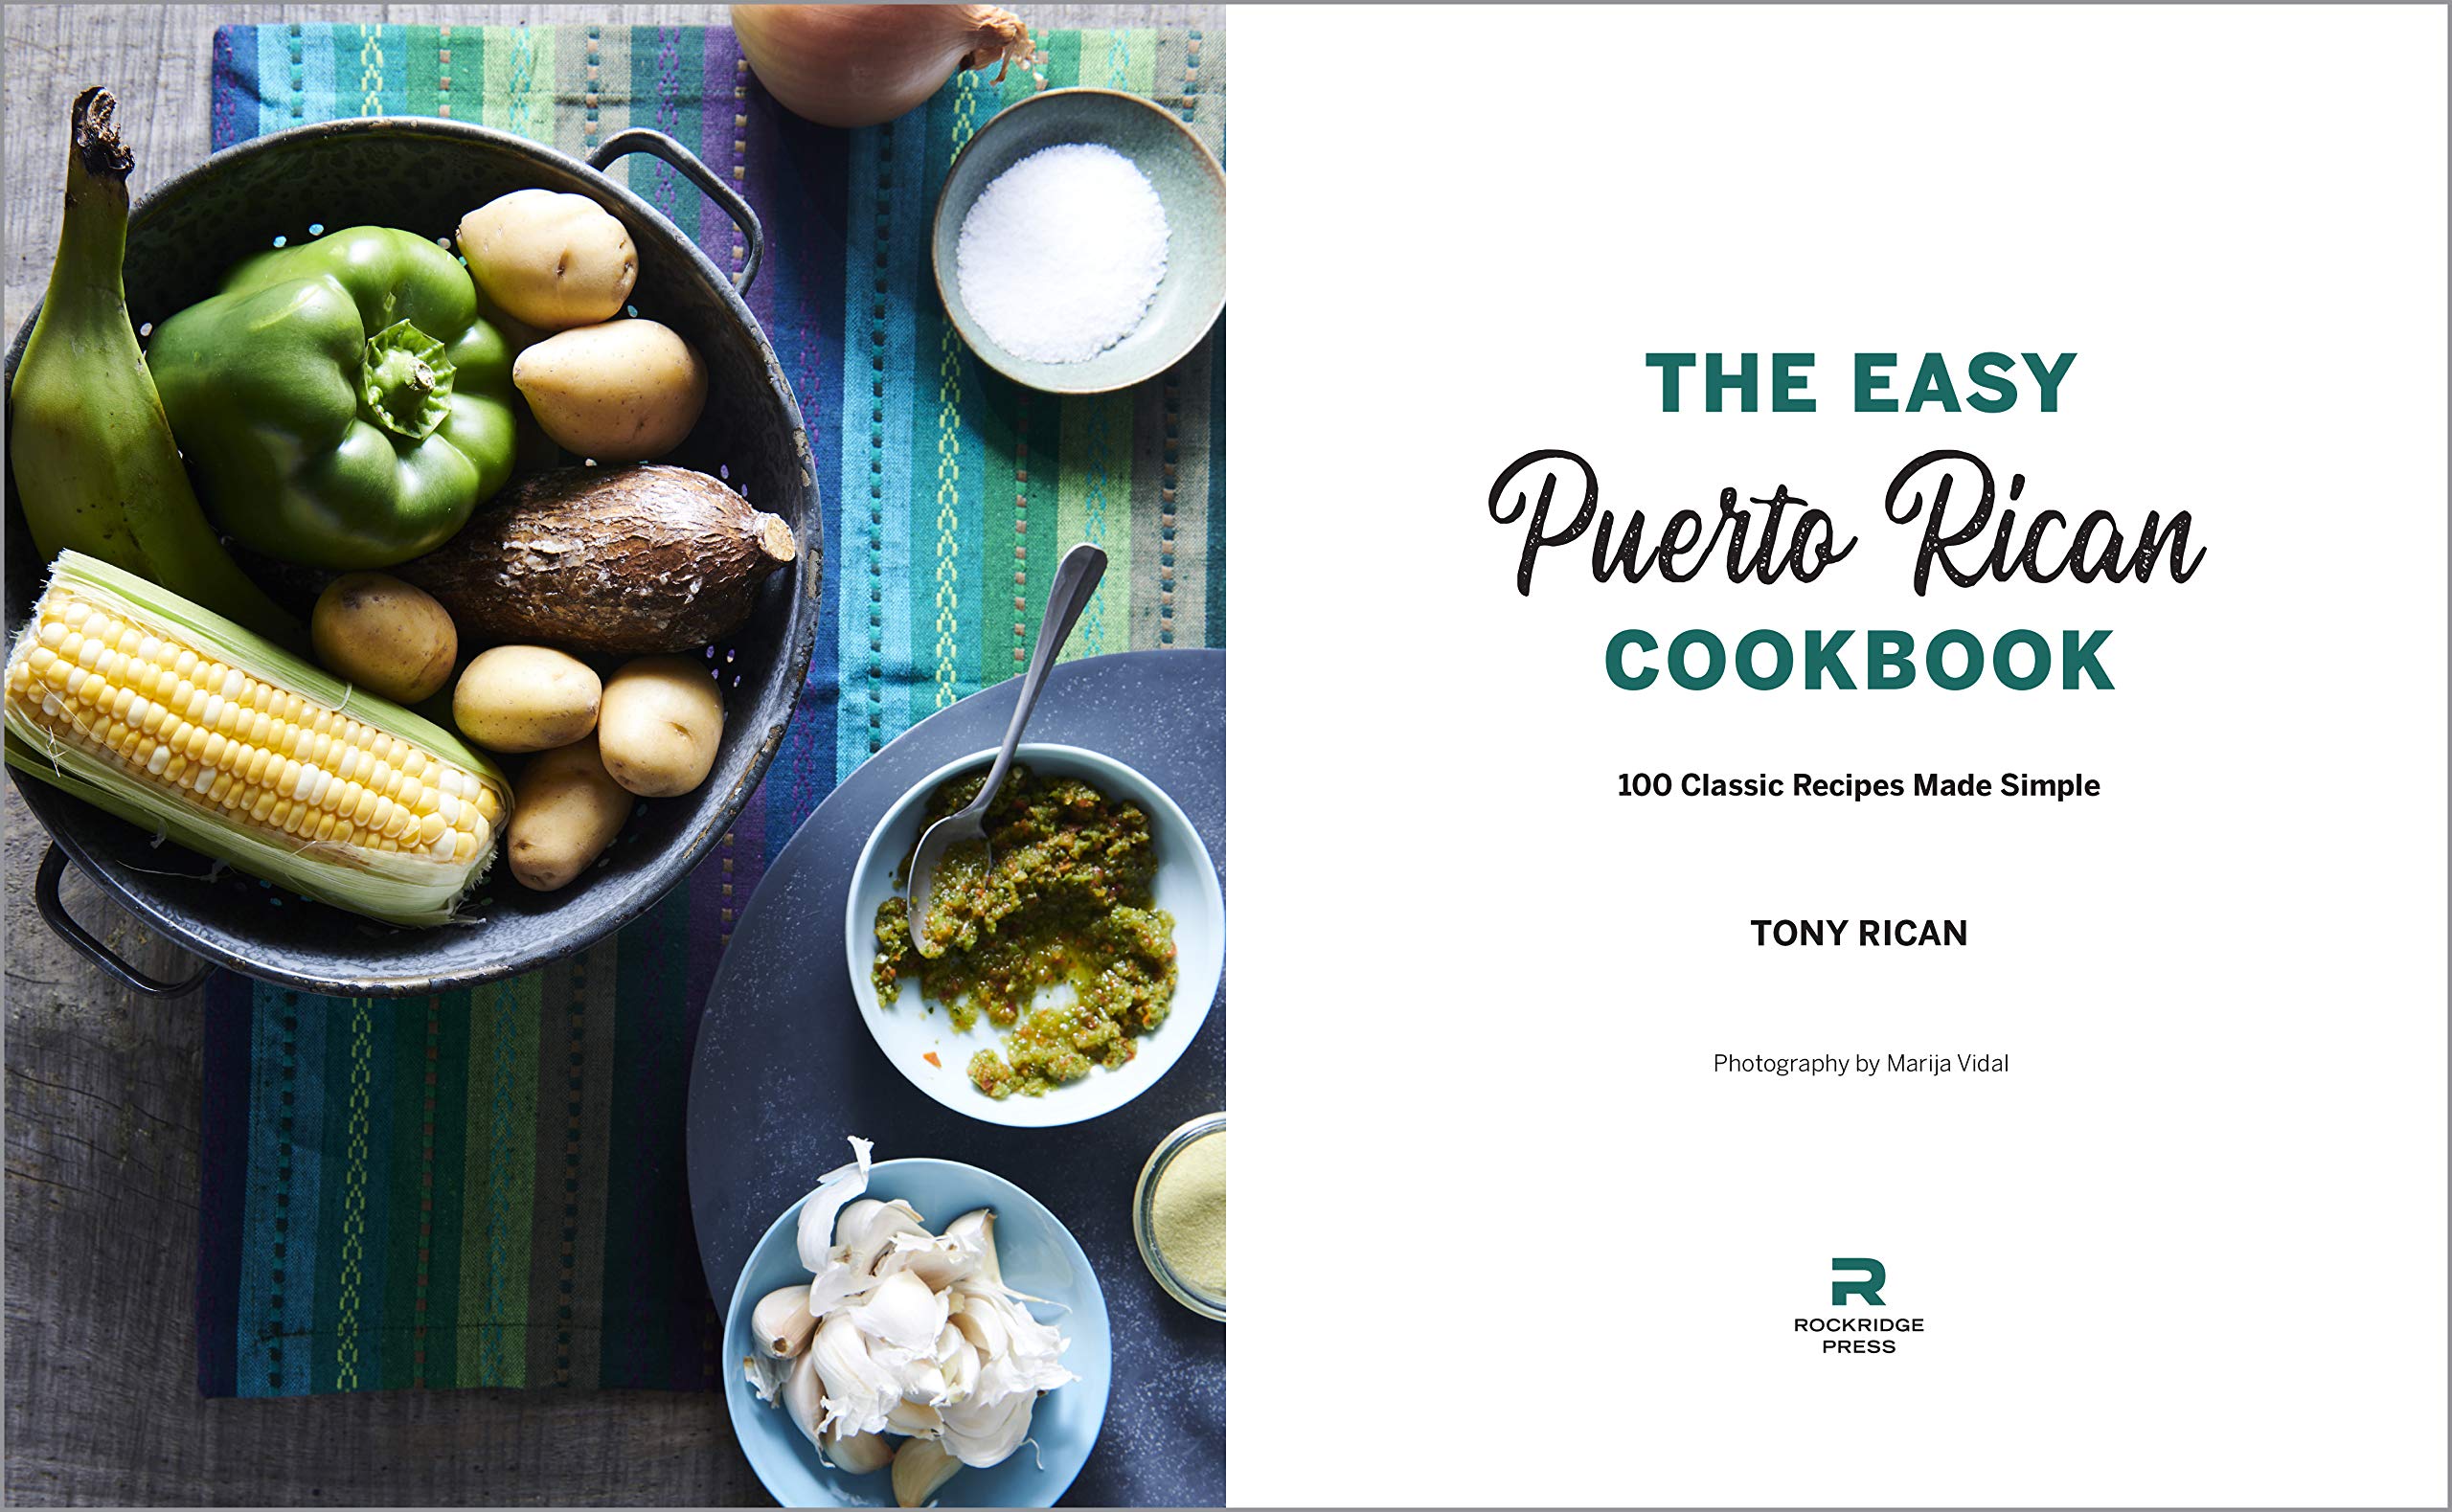 The Easy Puerto Rican Cookbook: 100 Classic Recipes Made Simple (Tony Rican)